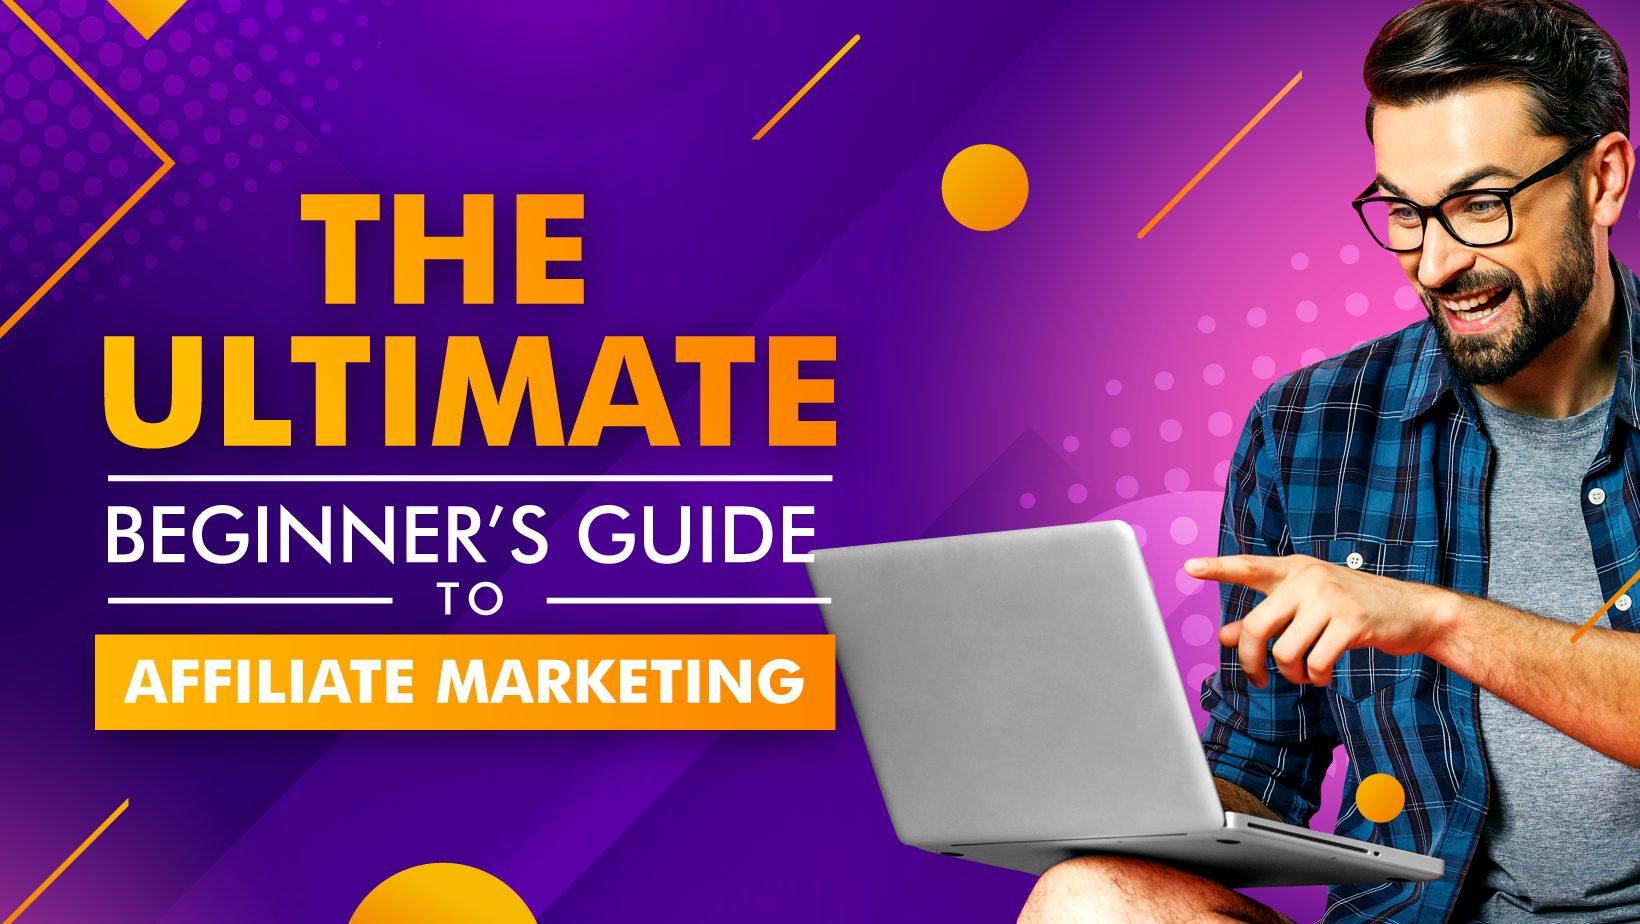 The Ultimate Beginner’s Guide to Affiliate Marketing